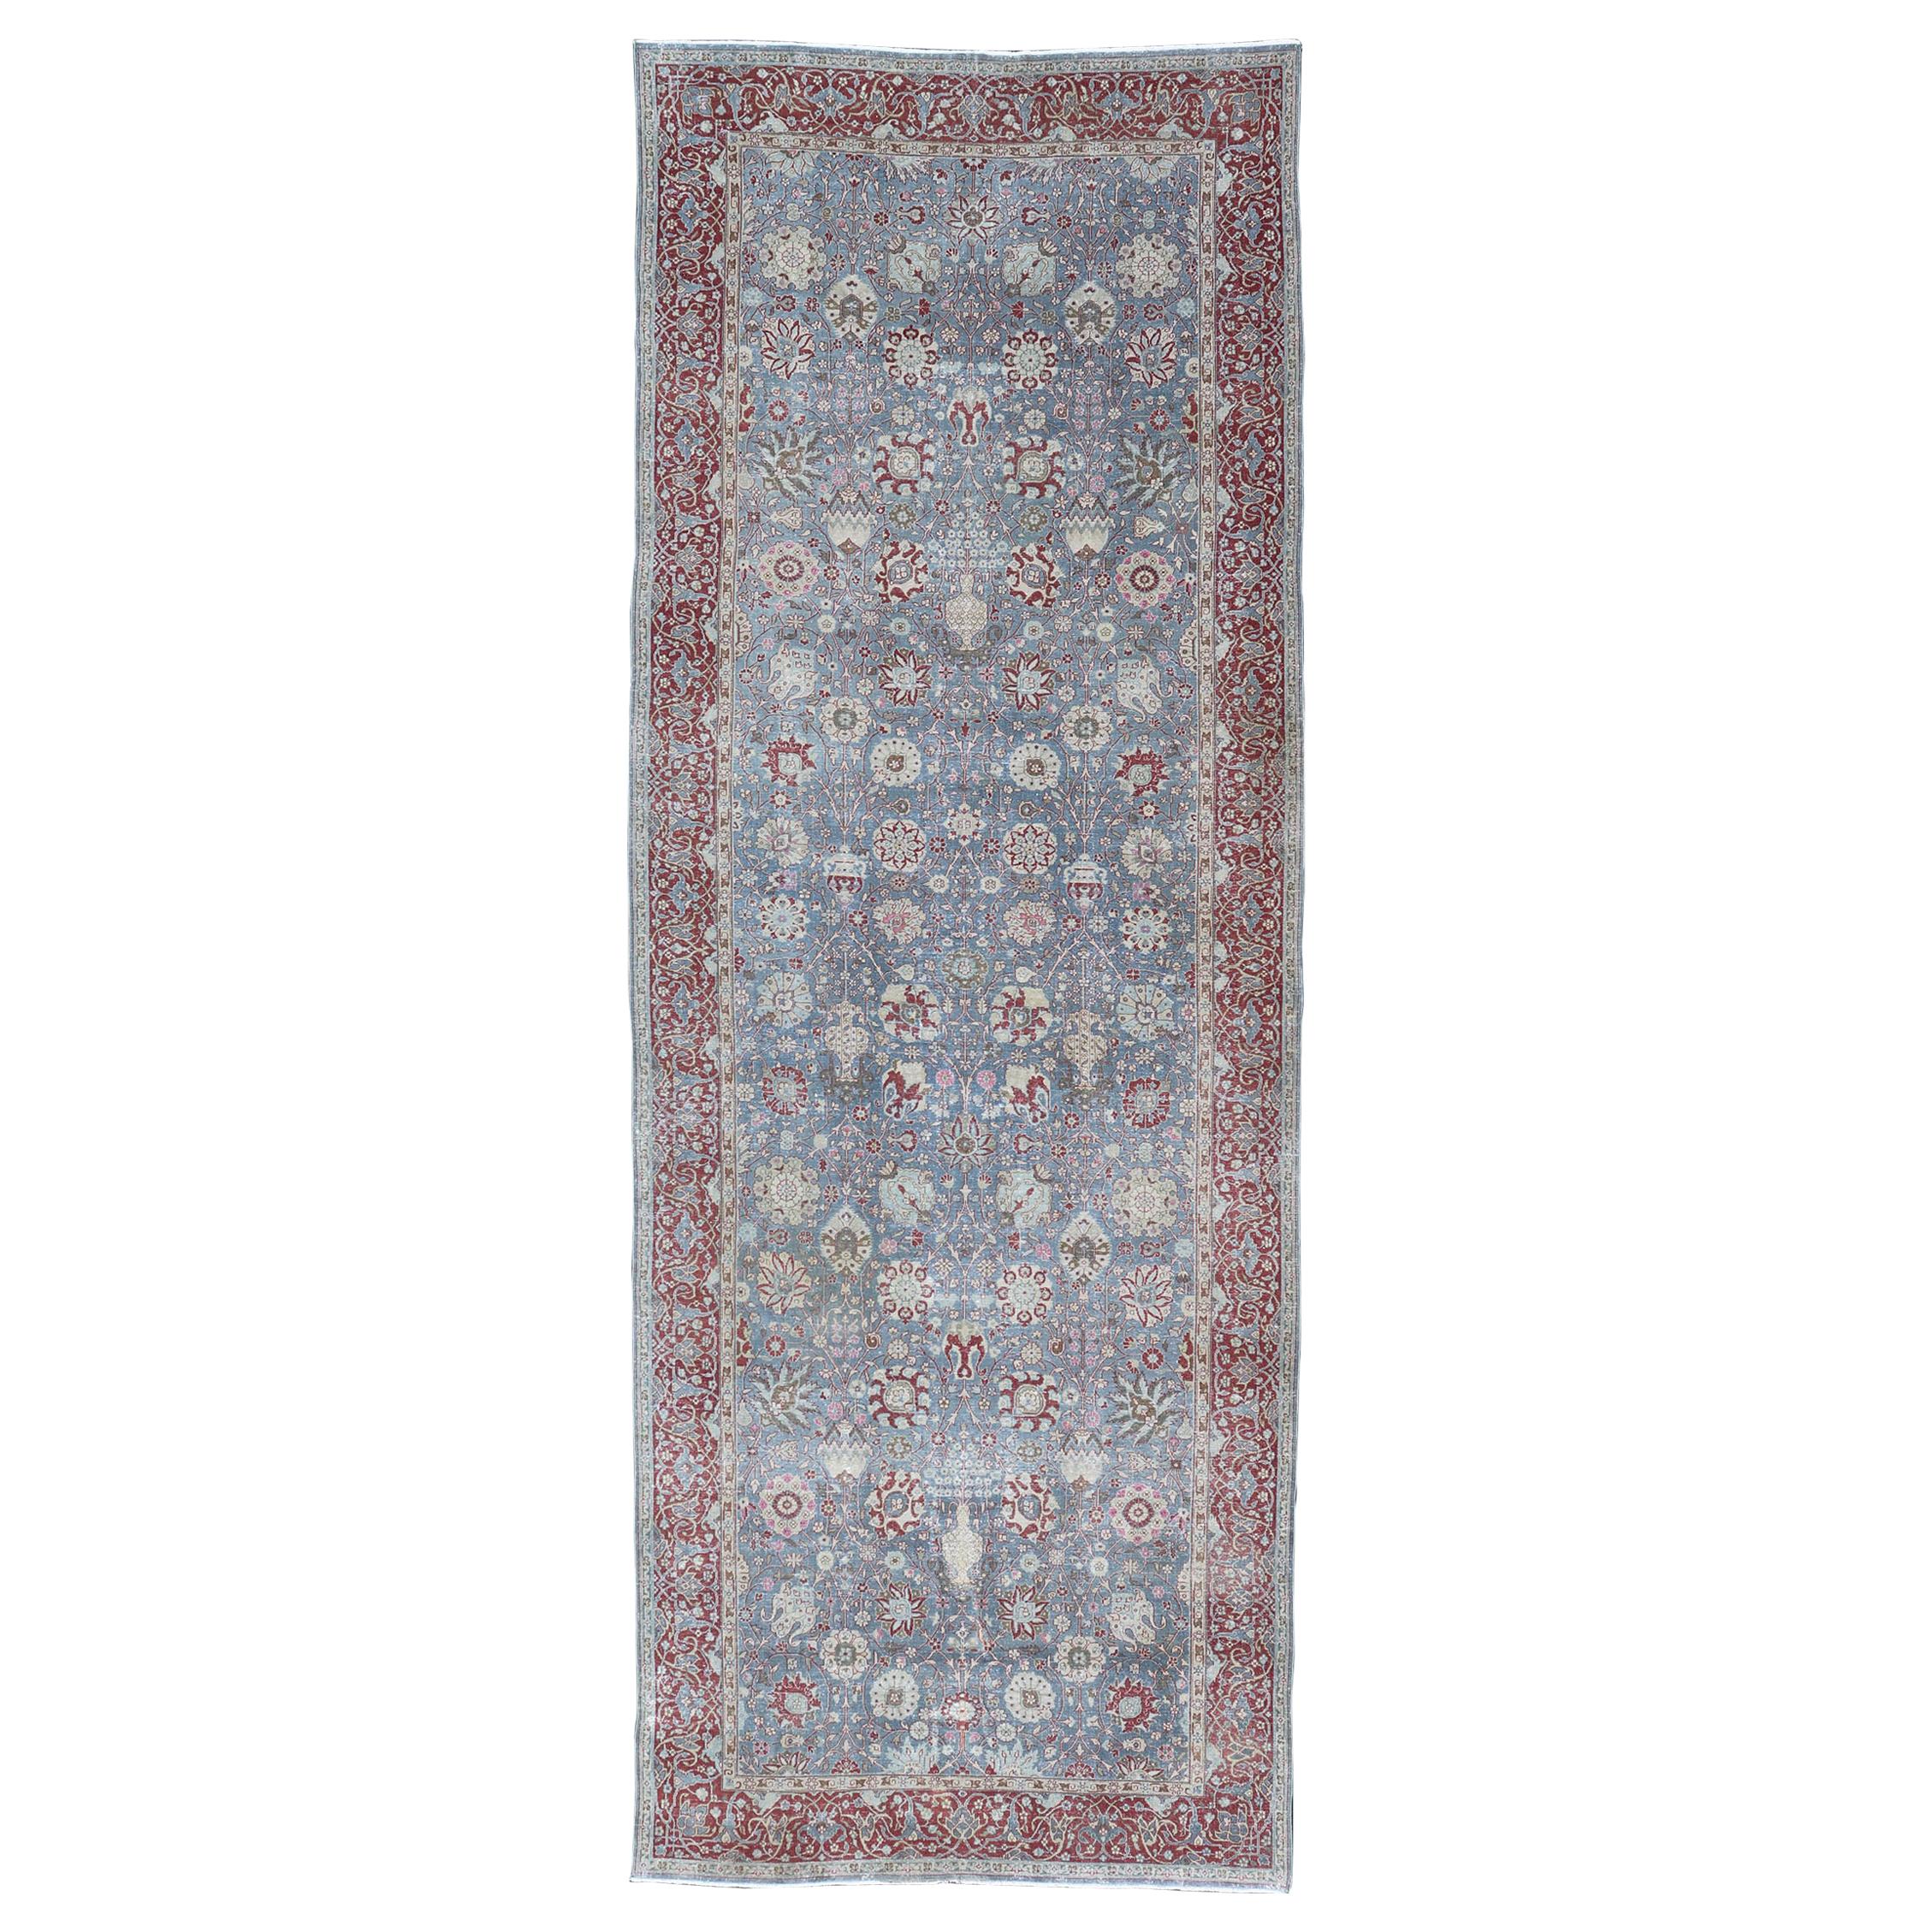 Very Large Antique Turkish Gallery Rug with All-Over Design in Light Blue